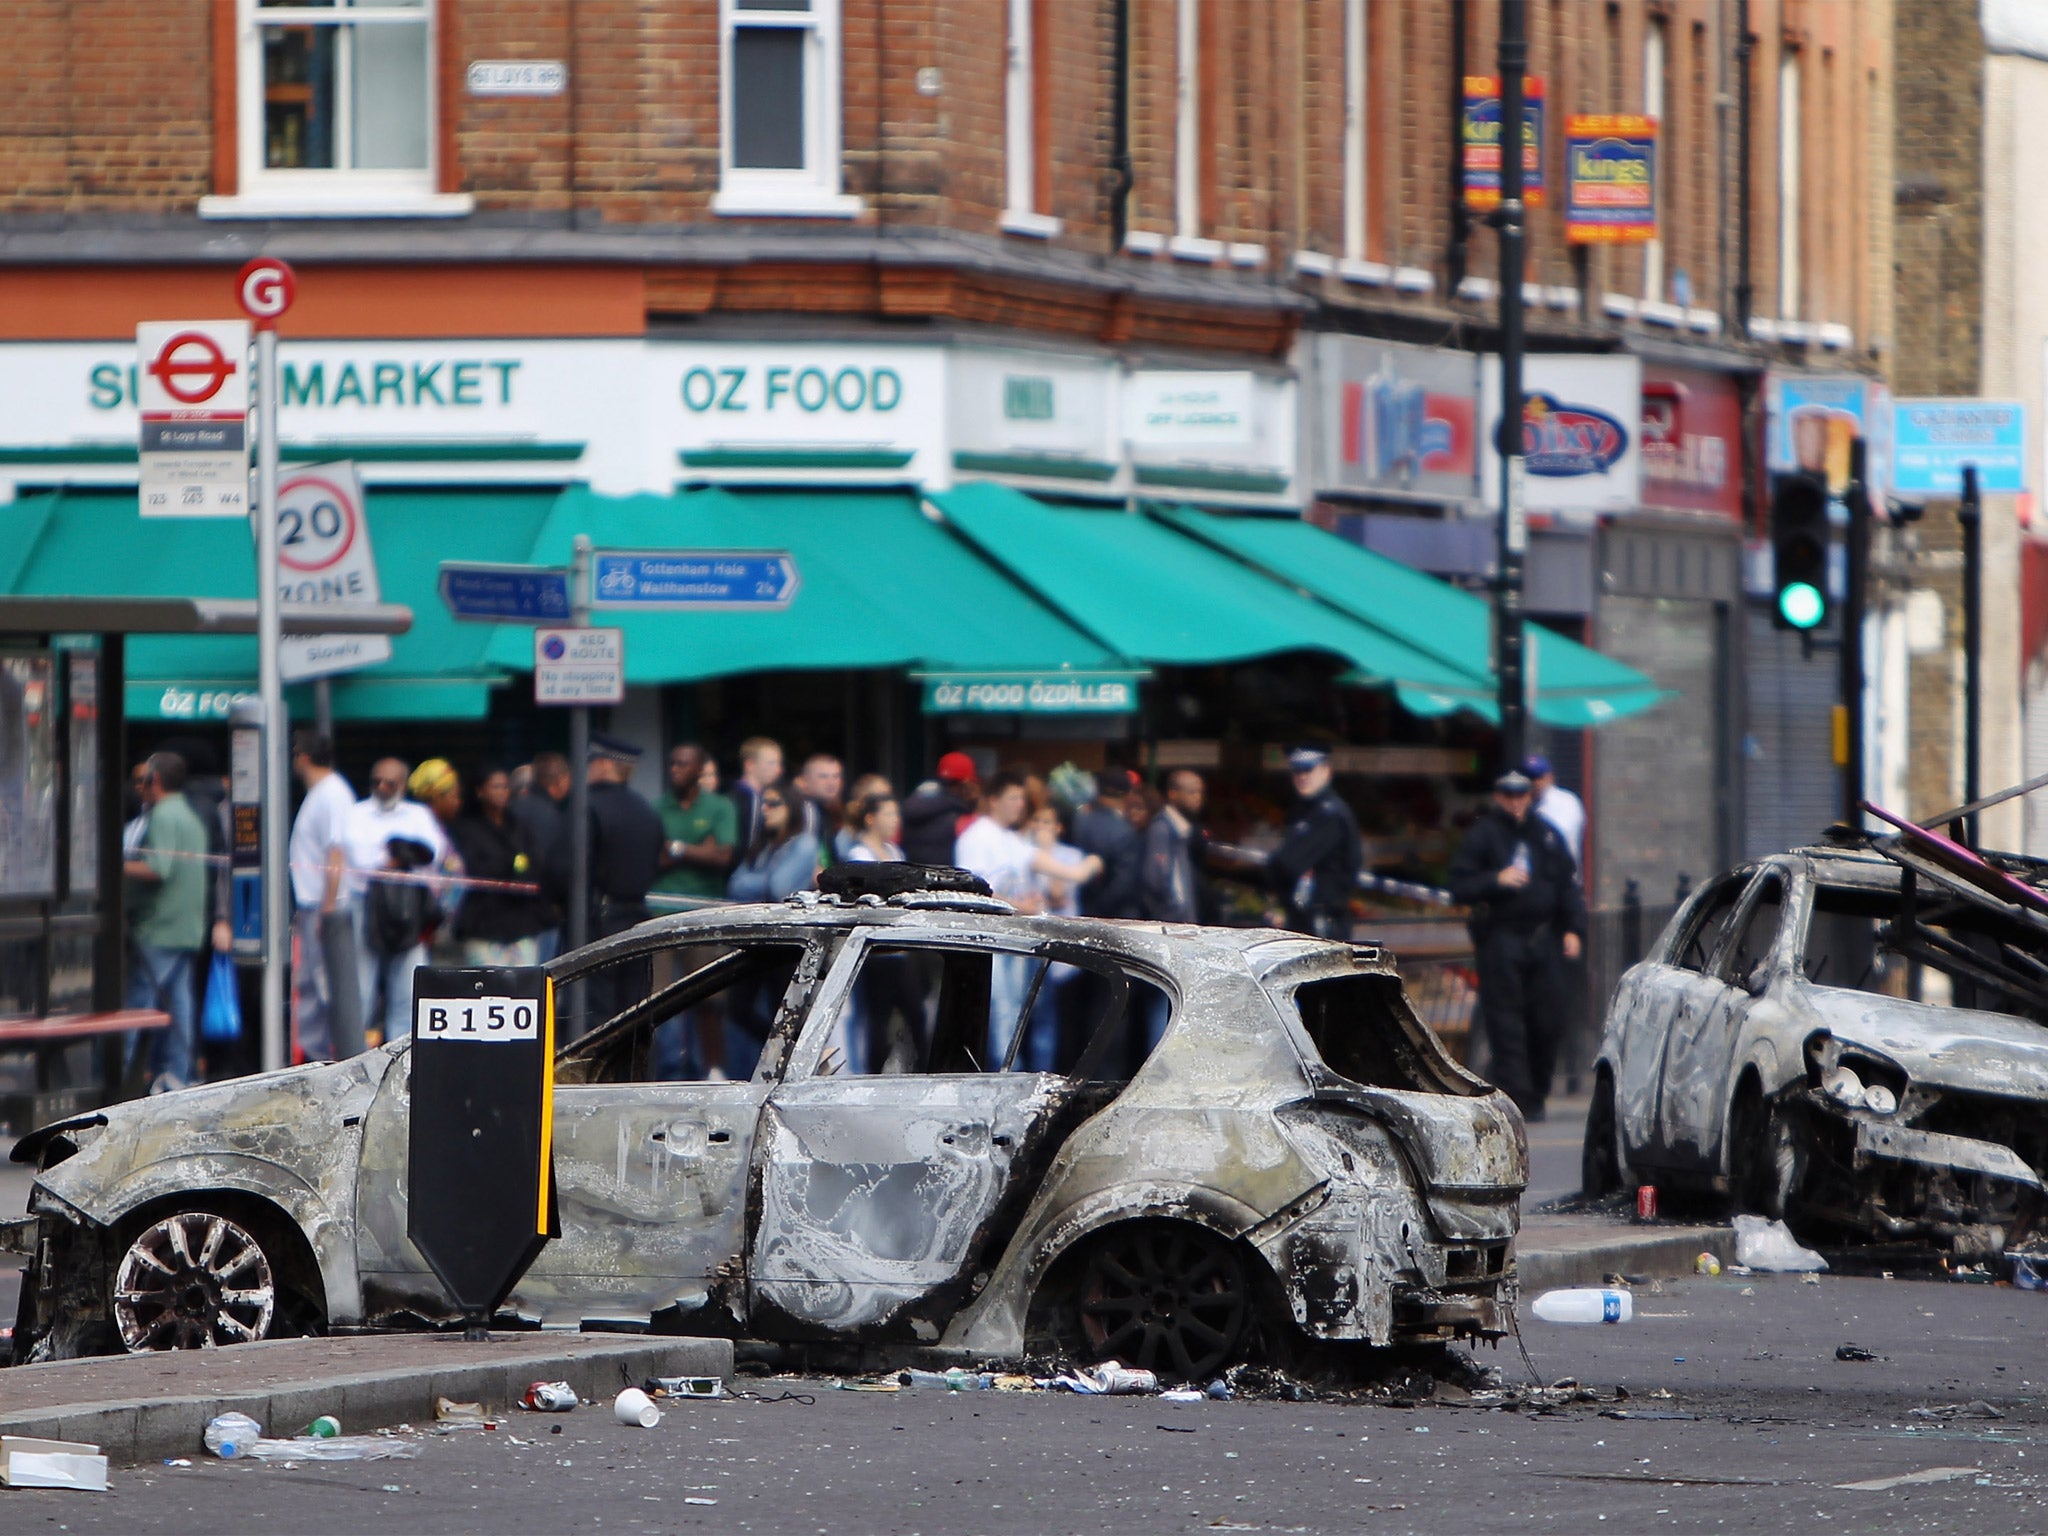 Burnt out cars lie in the road after riots on Tottenham High Road on August 7, 2011